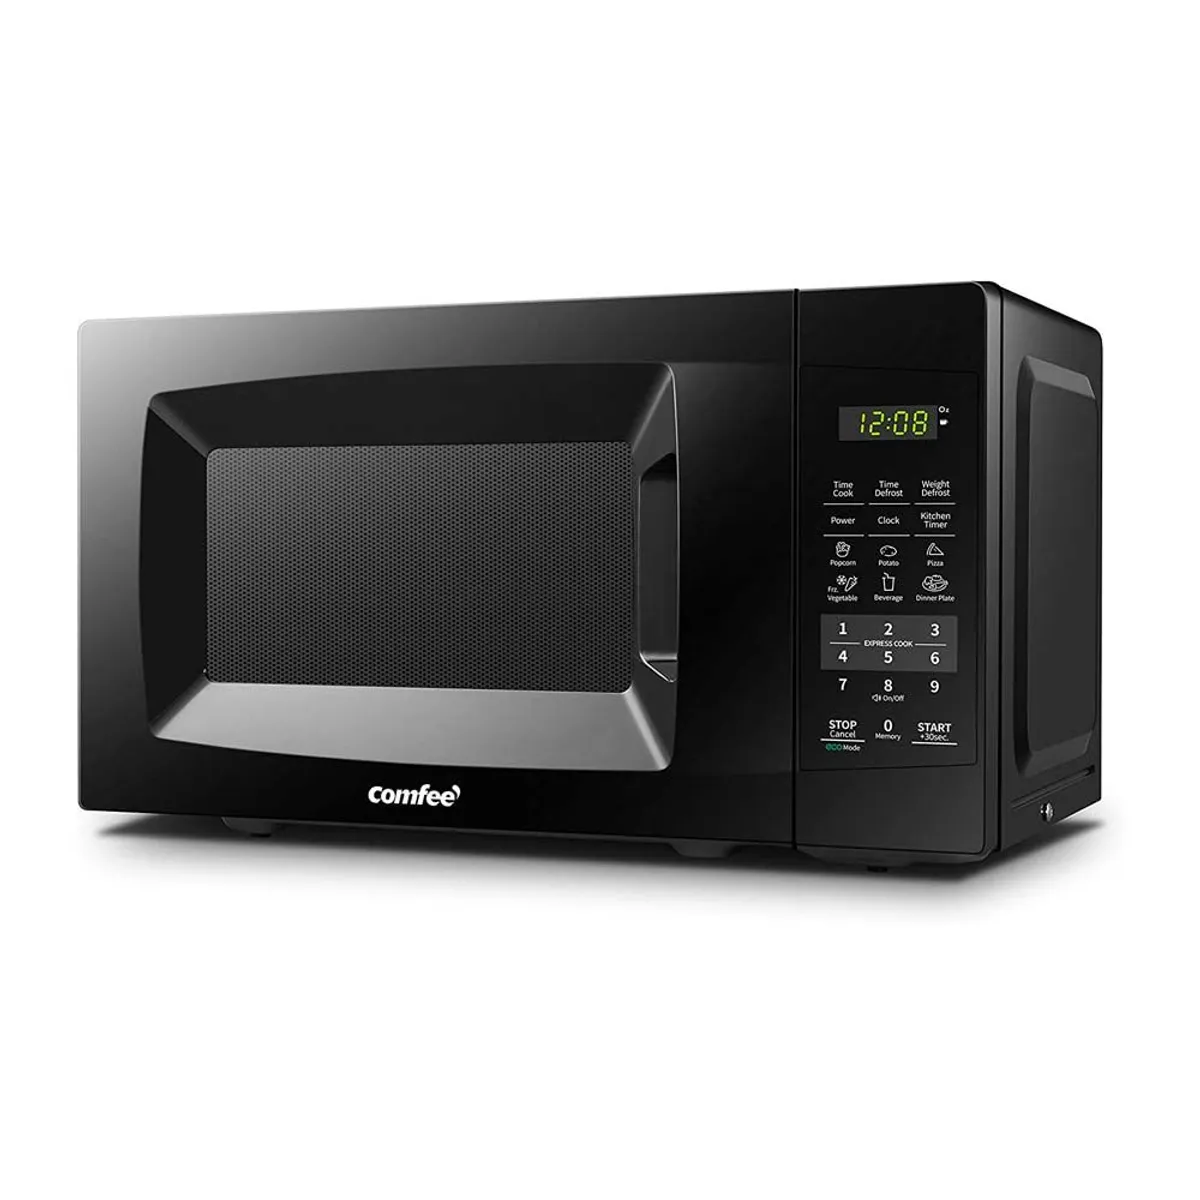 COMFEE' EM720CPL-PMB Countertop Microwave Oven